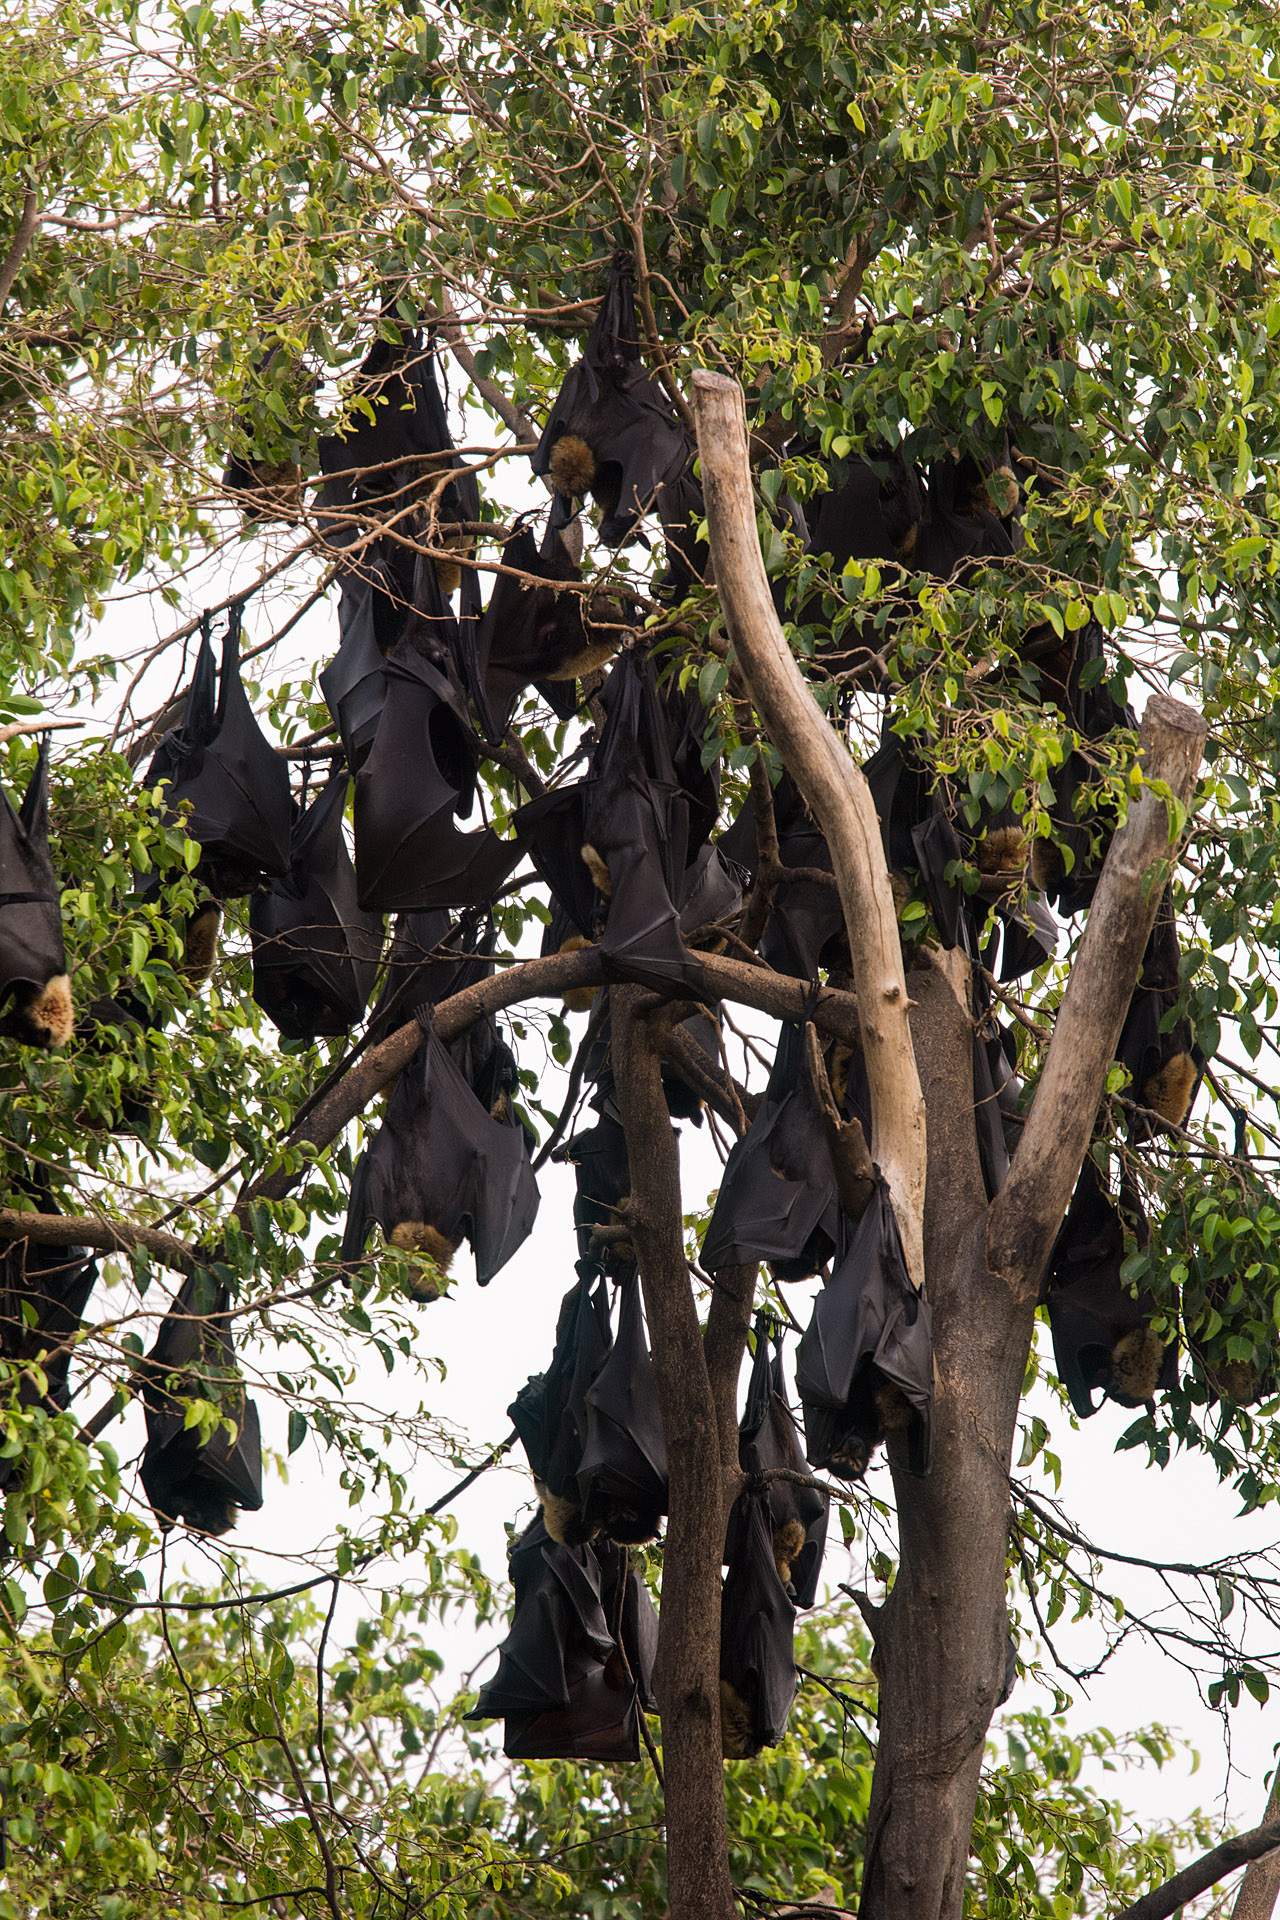 Spectacled flying foxes